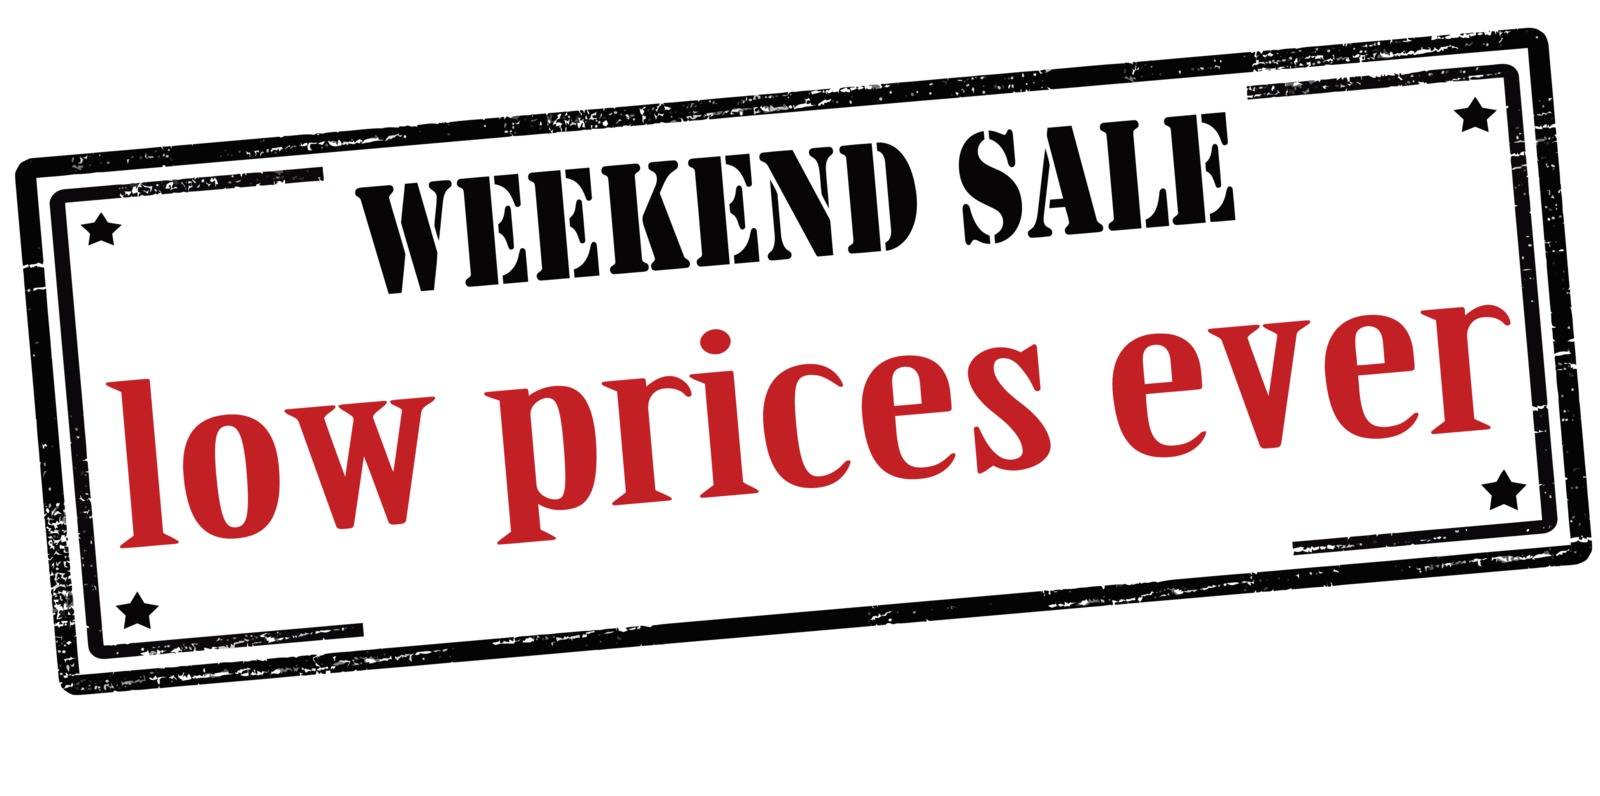 Weekend sale low prices ever by carmenbobo